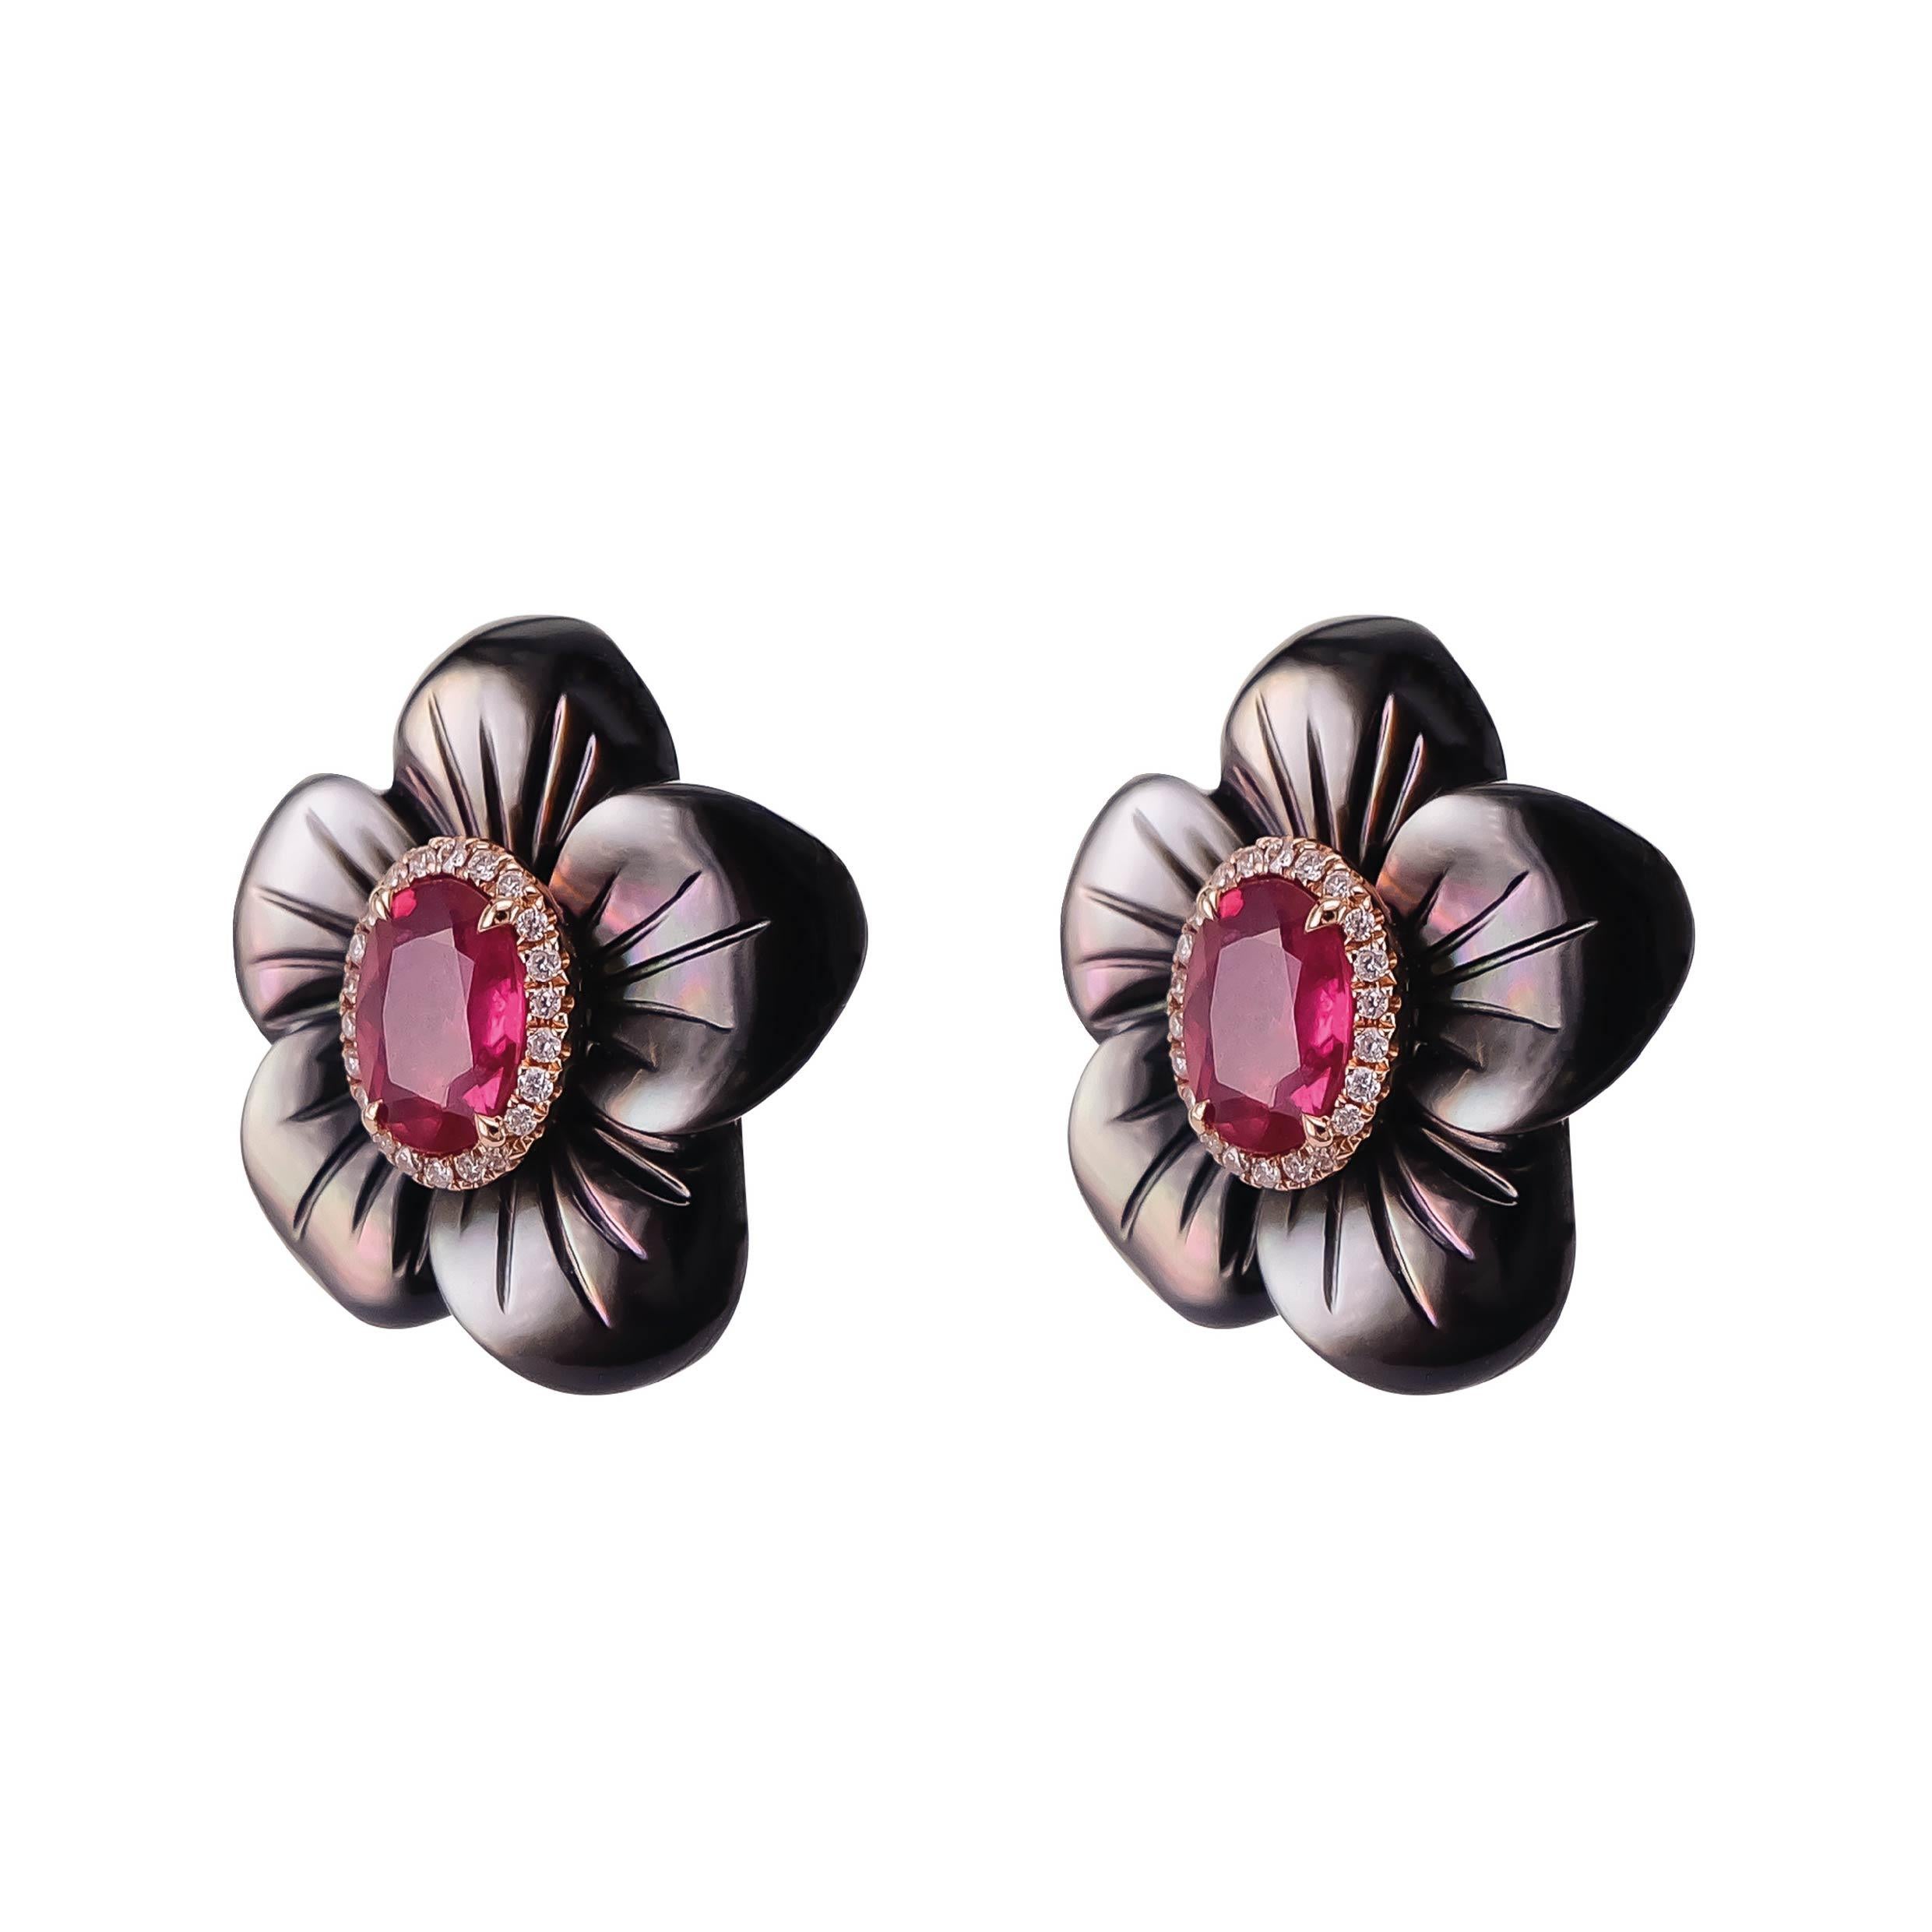 A mix of 1.73 carats of vivid red ruby from Mozambique is set along with 22.12 carats of Black Mother of Pearl. The earring is accented with 0.13 carats of white brilliant diamond.  The details of the earring are mentioned below:
Color: F
Clarity :